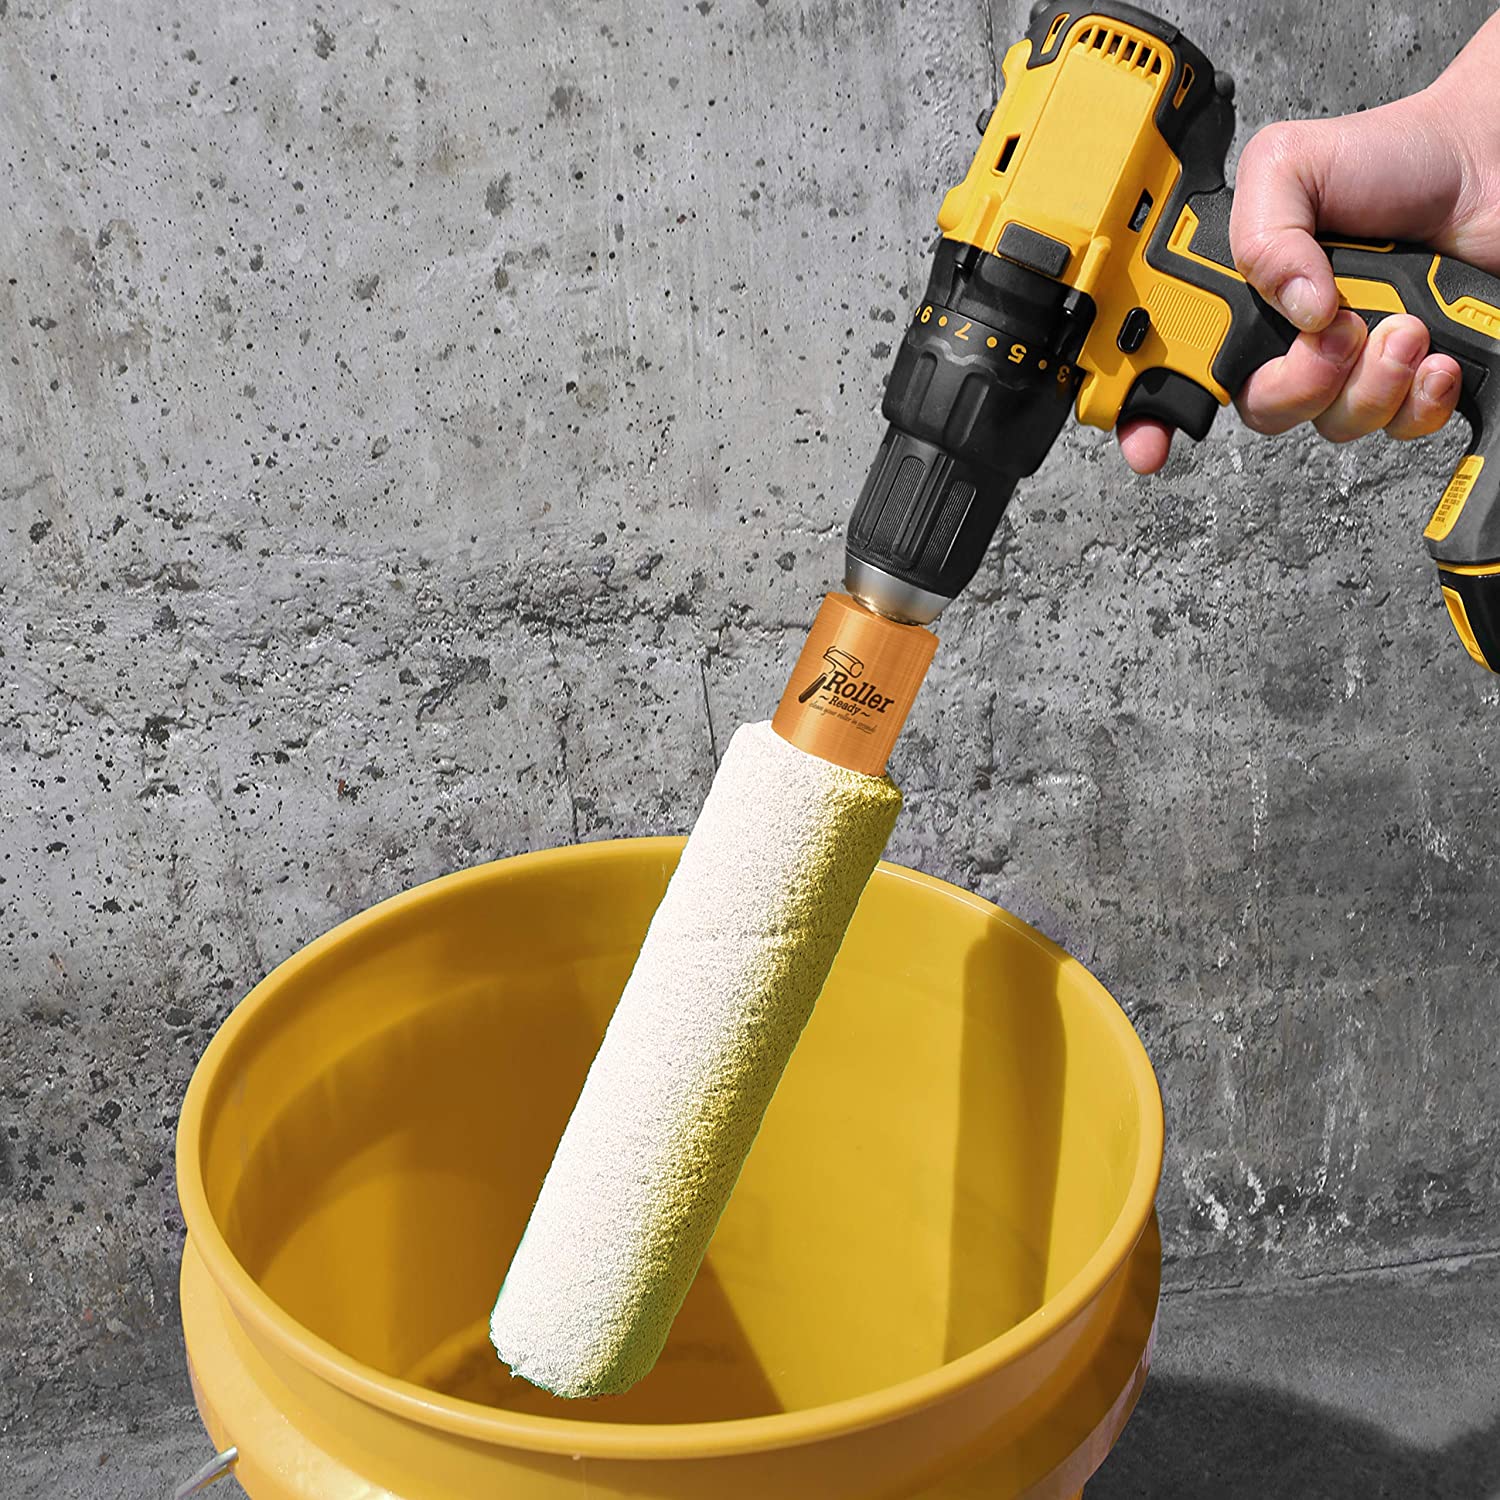 The Roller Ready Paint Roller Cleaner (Cleans Rollers Fast